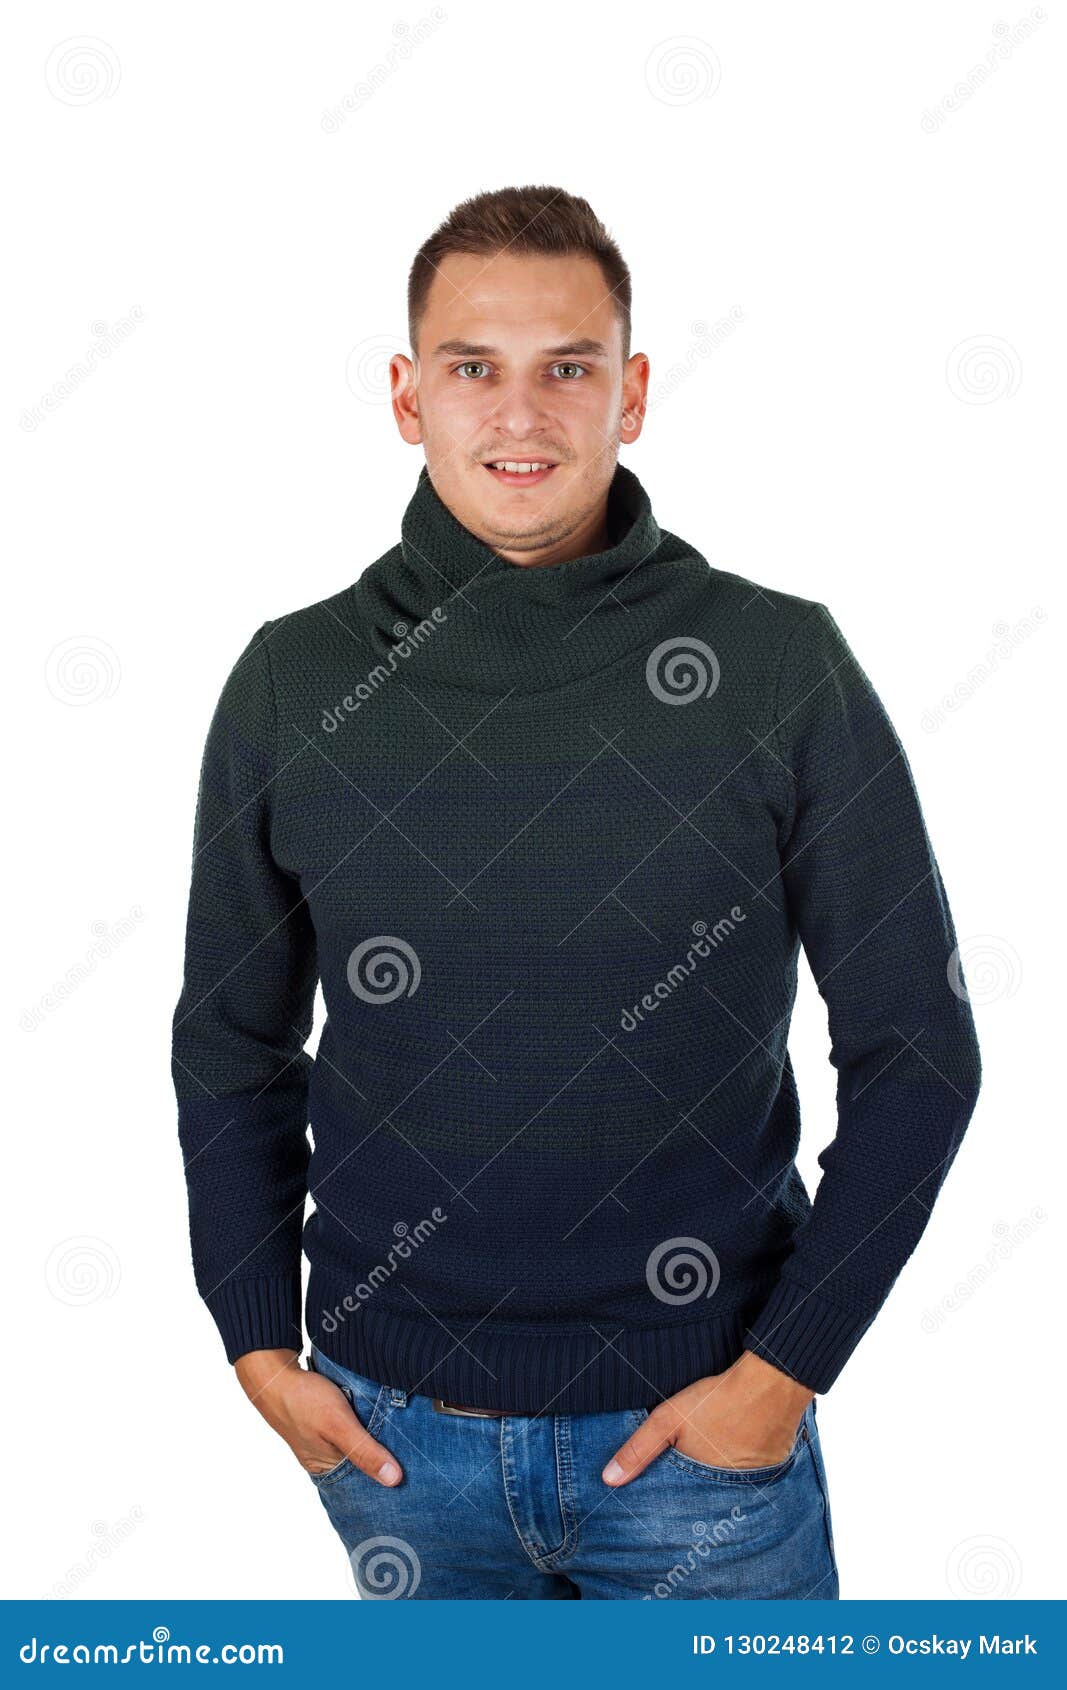 Man Wearing Knitted Sweater Stock Photo - Image of adult, knit: 130248412